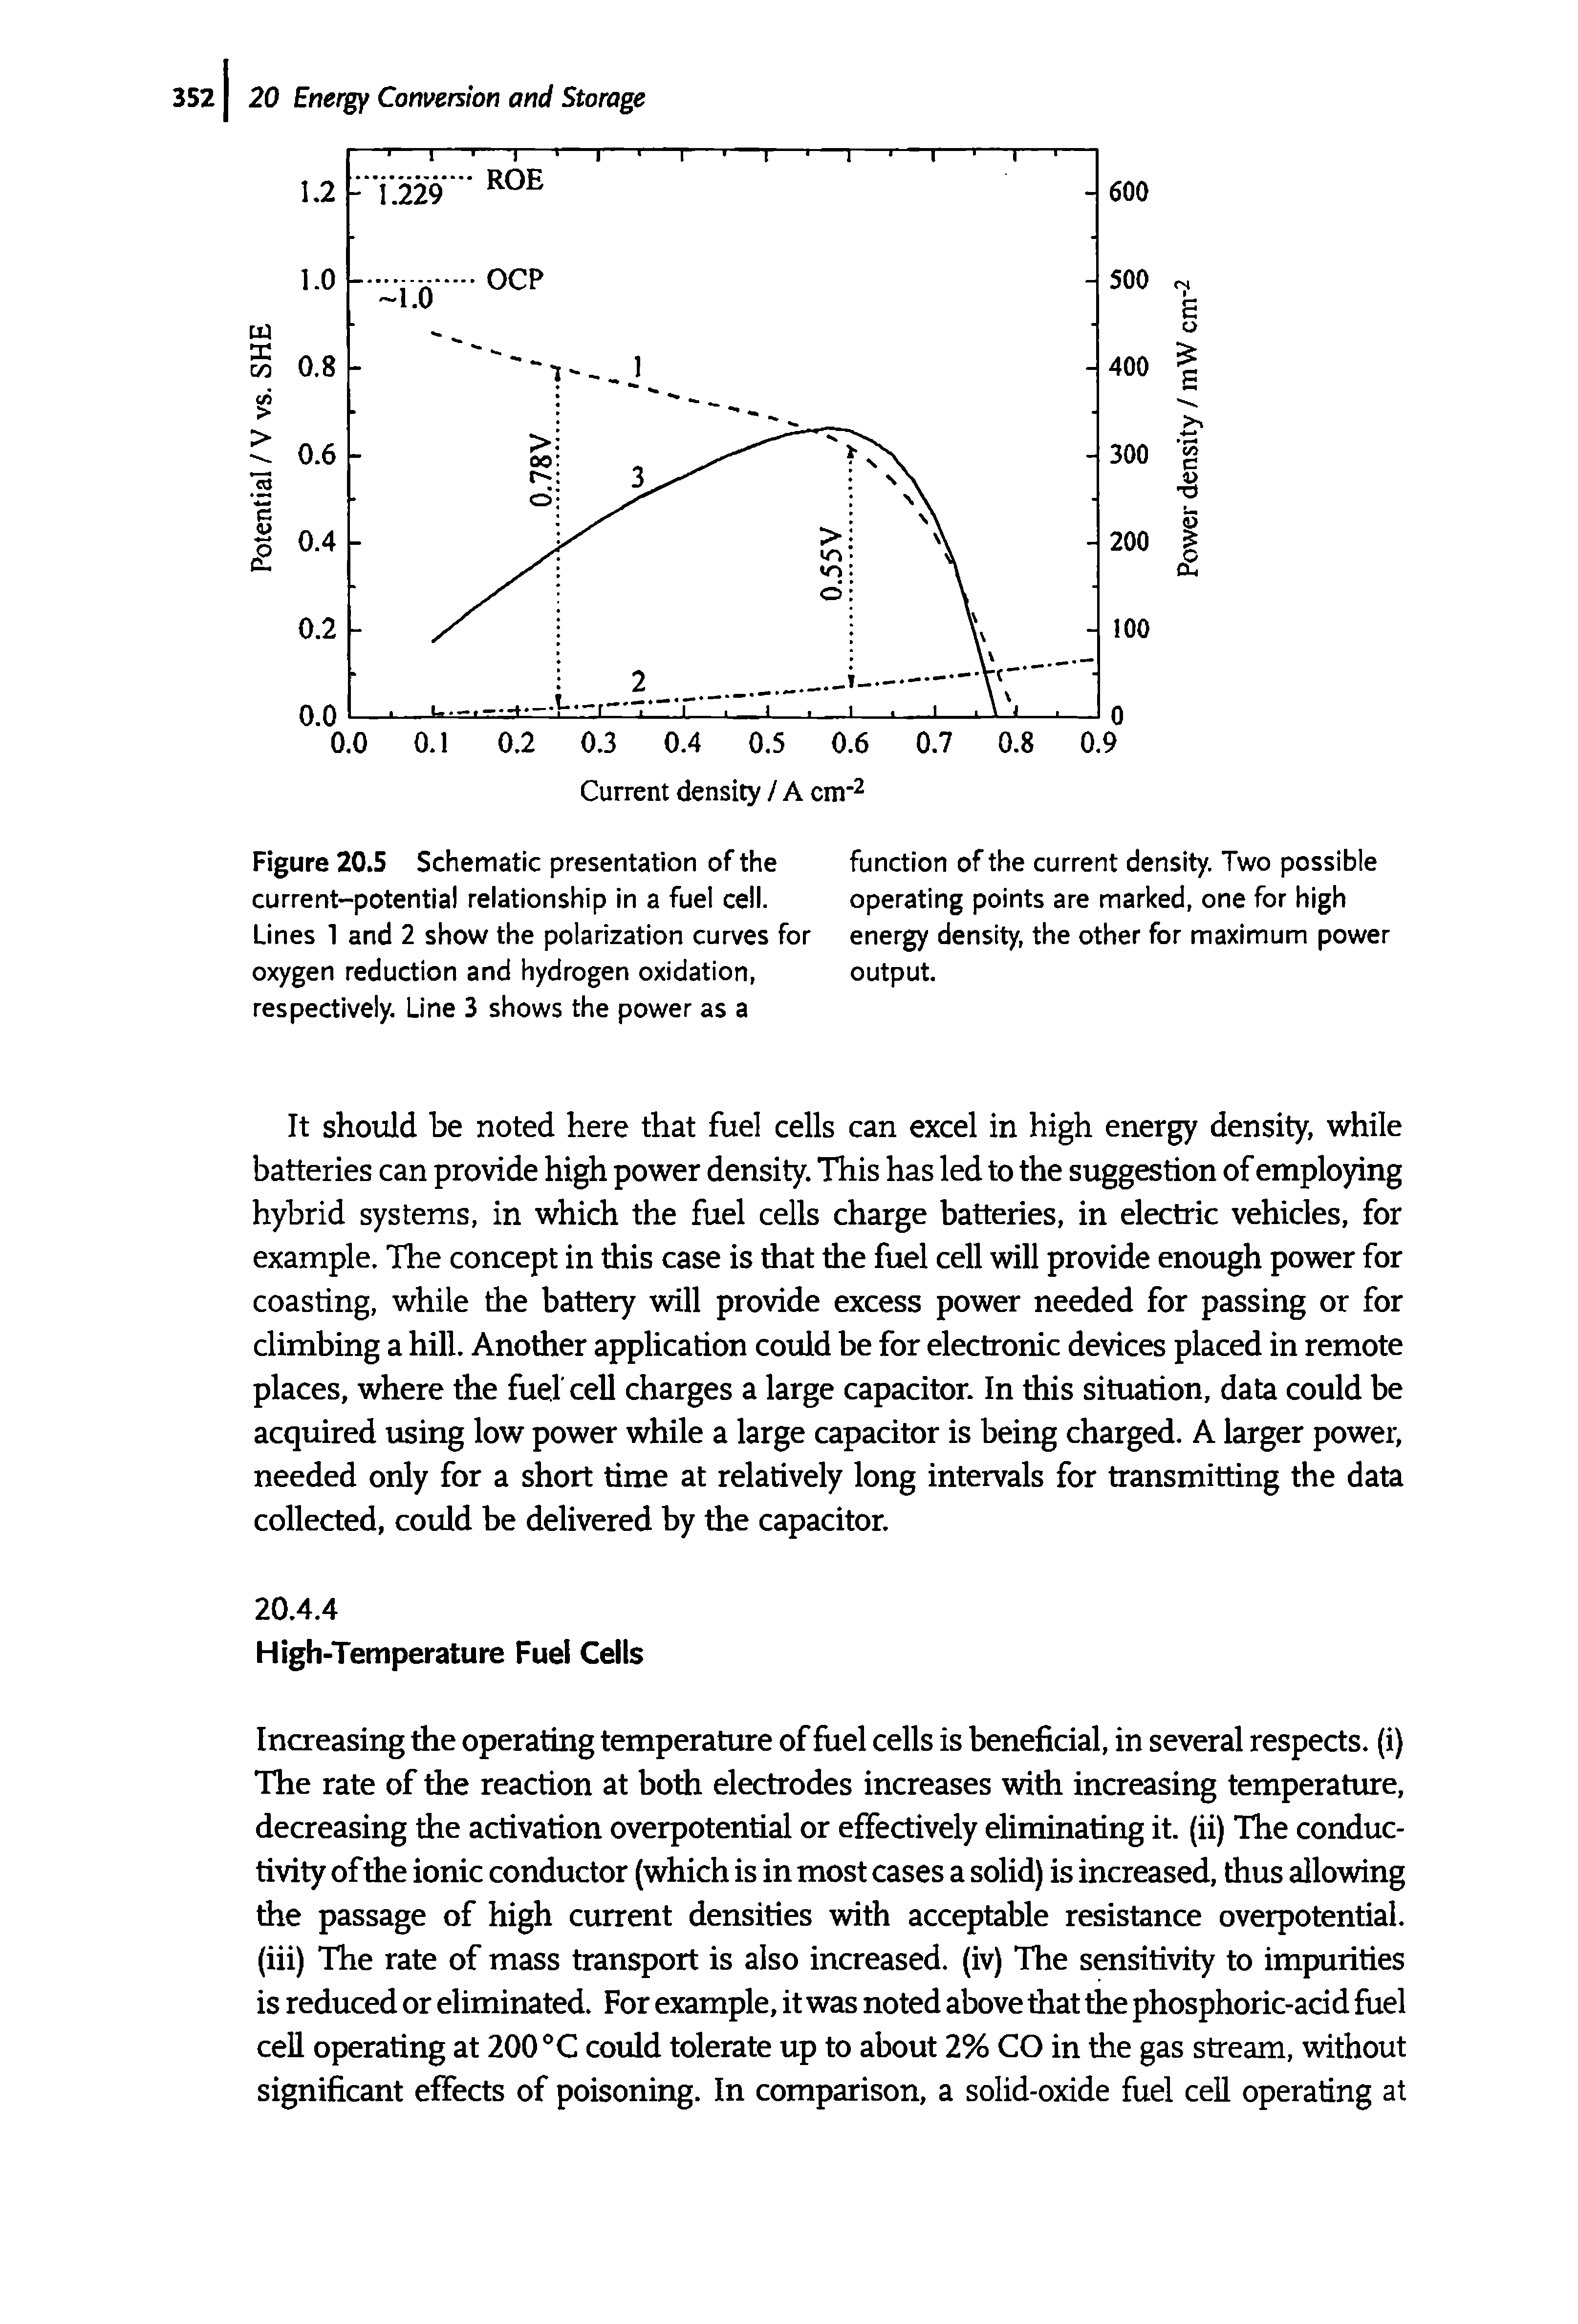 Figure 20.5 Schematic presentation of the current-potential relationship in a fuel cell. Lines 1 and 2 show the polarization curves for oxygen reduction and hydrogen oxidation, respectively. Line 3 shows the power as a...